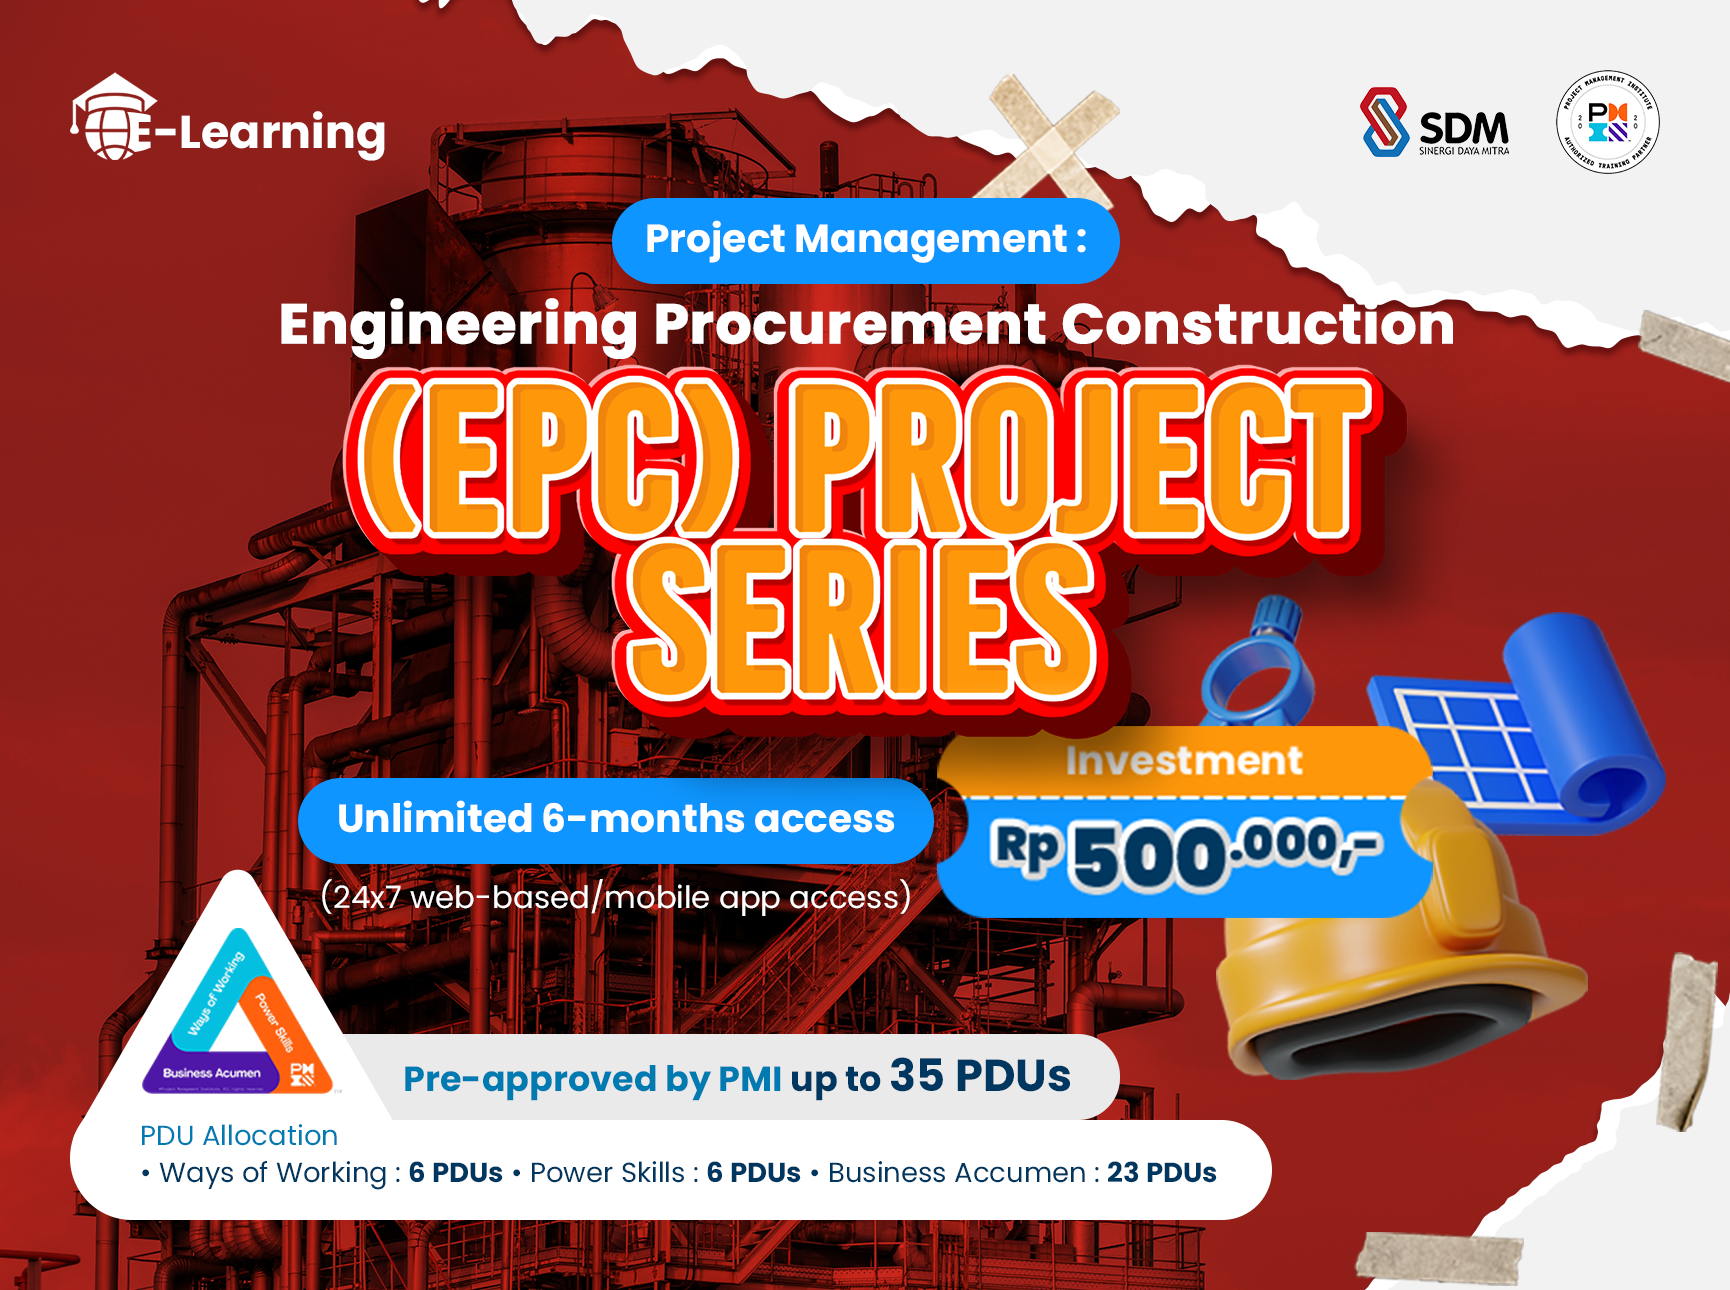 E-Learning : Project Management - Engineering Procurement Construction (EPC) Project Series